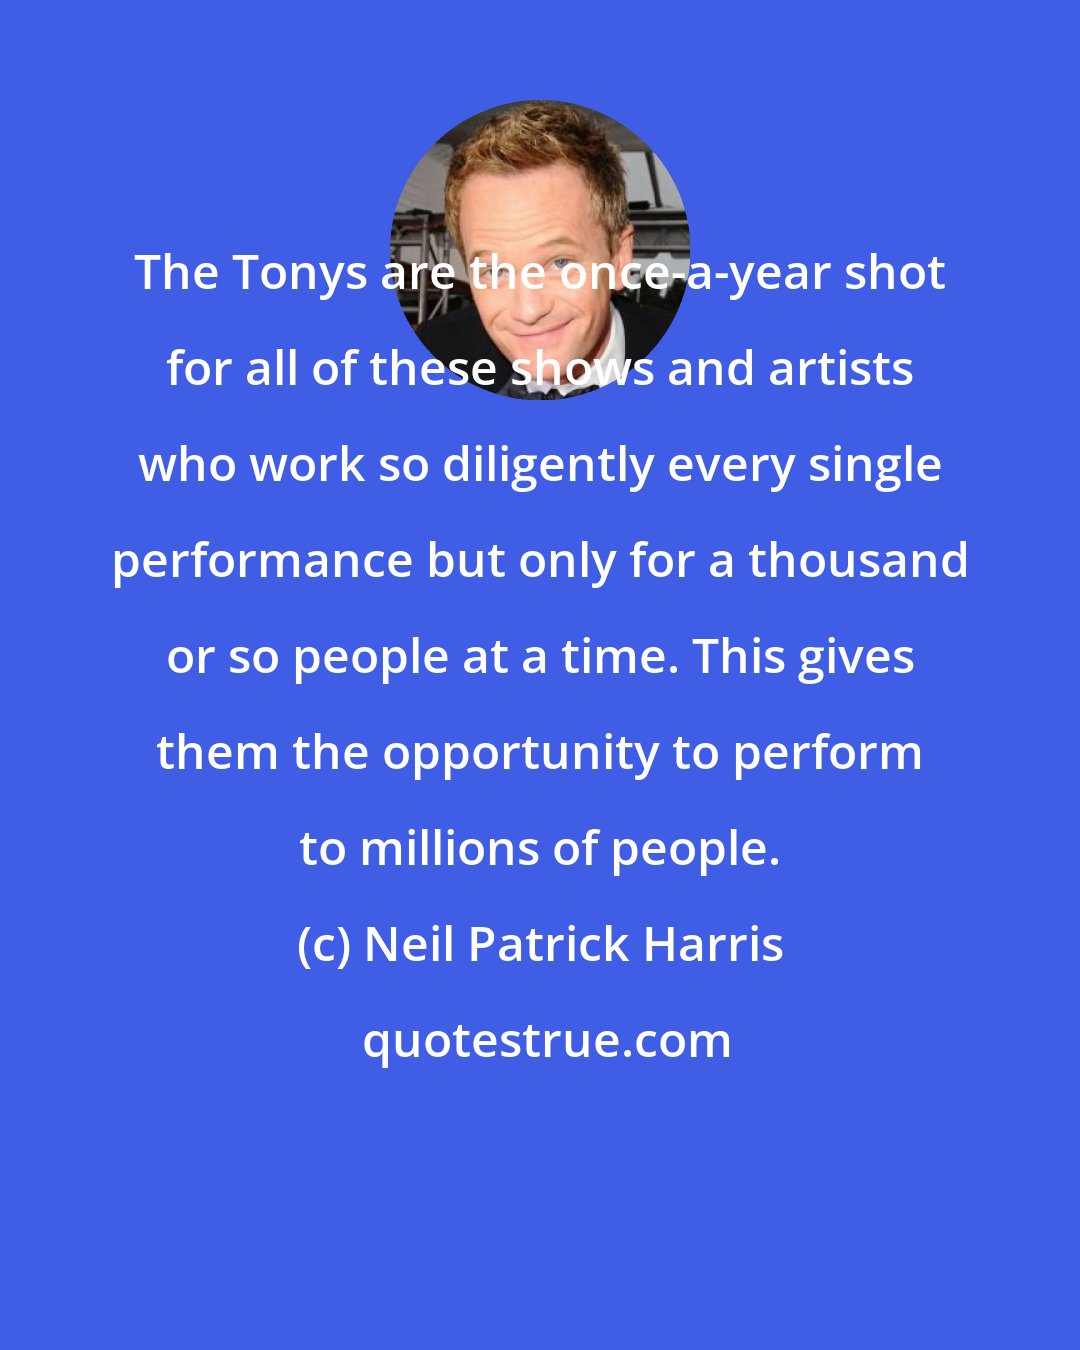 Neil Patrick Harris: The Tonys are the once-a-year shot for all of these shows and artists who work so diligently every single performance but only for a thousand or so people at a time. This gives them the opportunity to perform to millions of people.